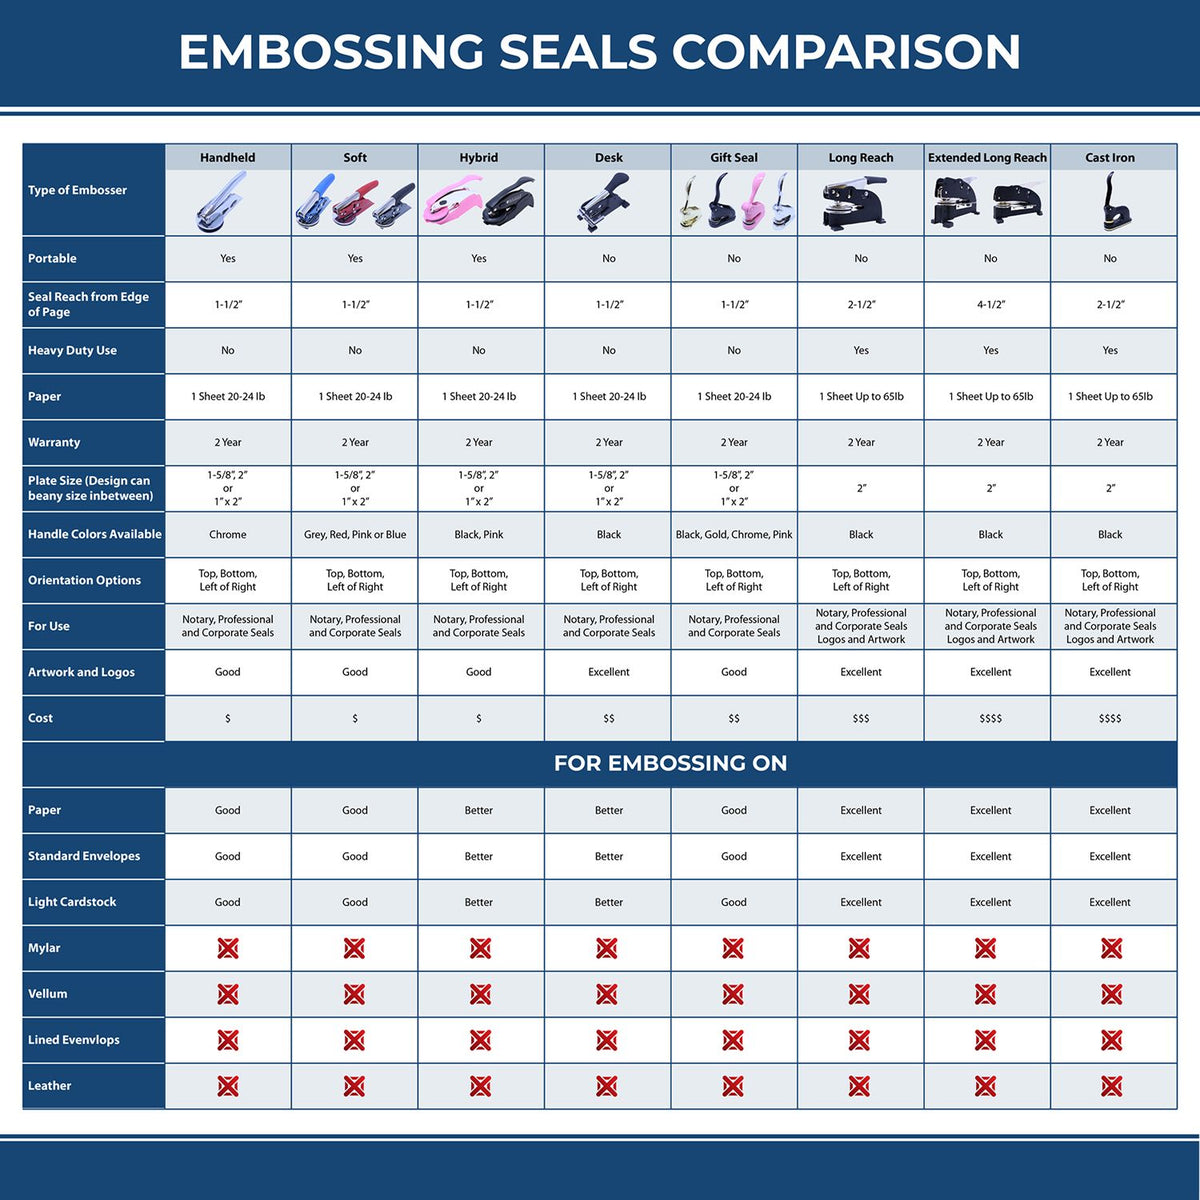 A comparison chart for the different types of mount models available for the Hybrid Michigan Land Surveyor Seal